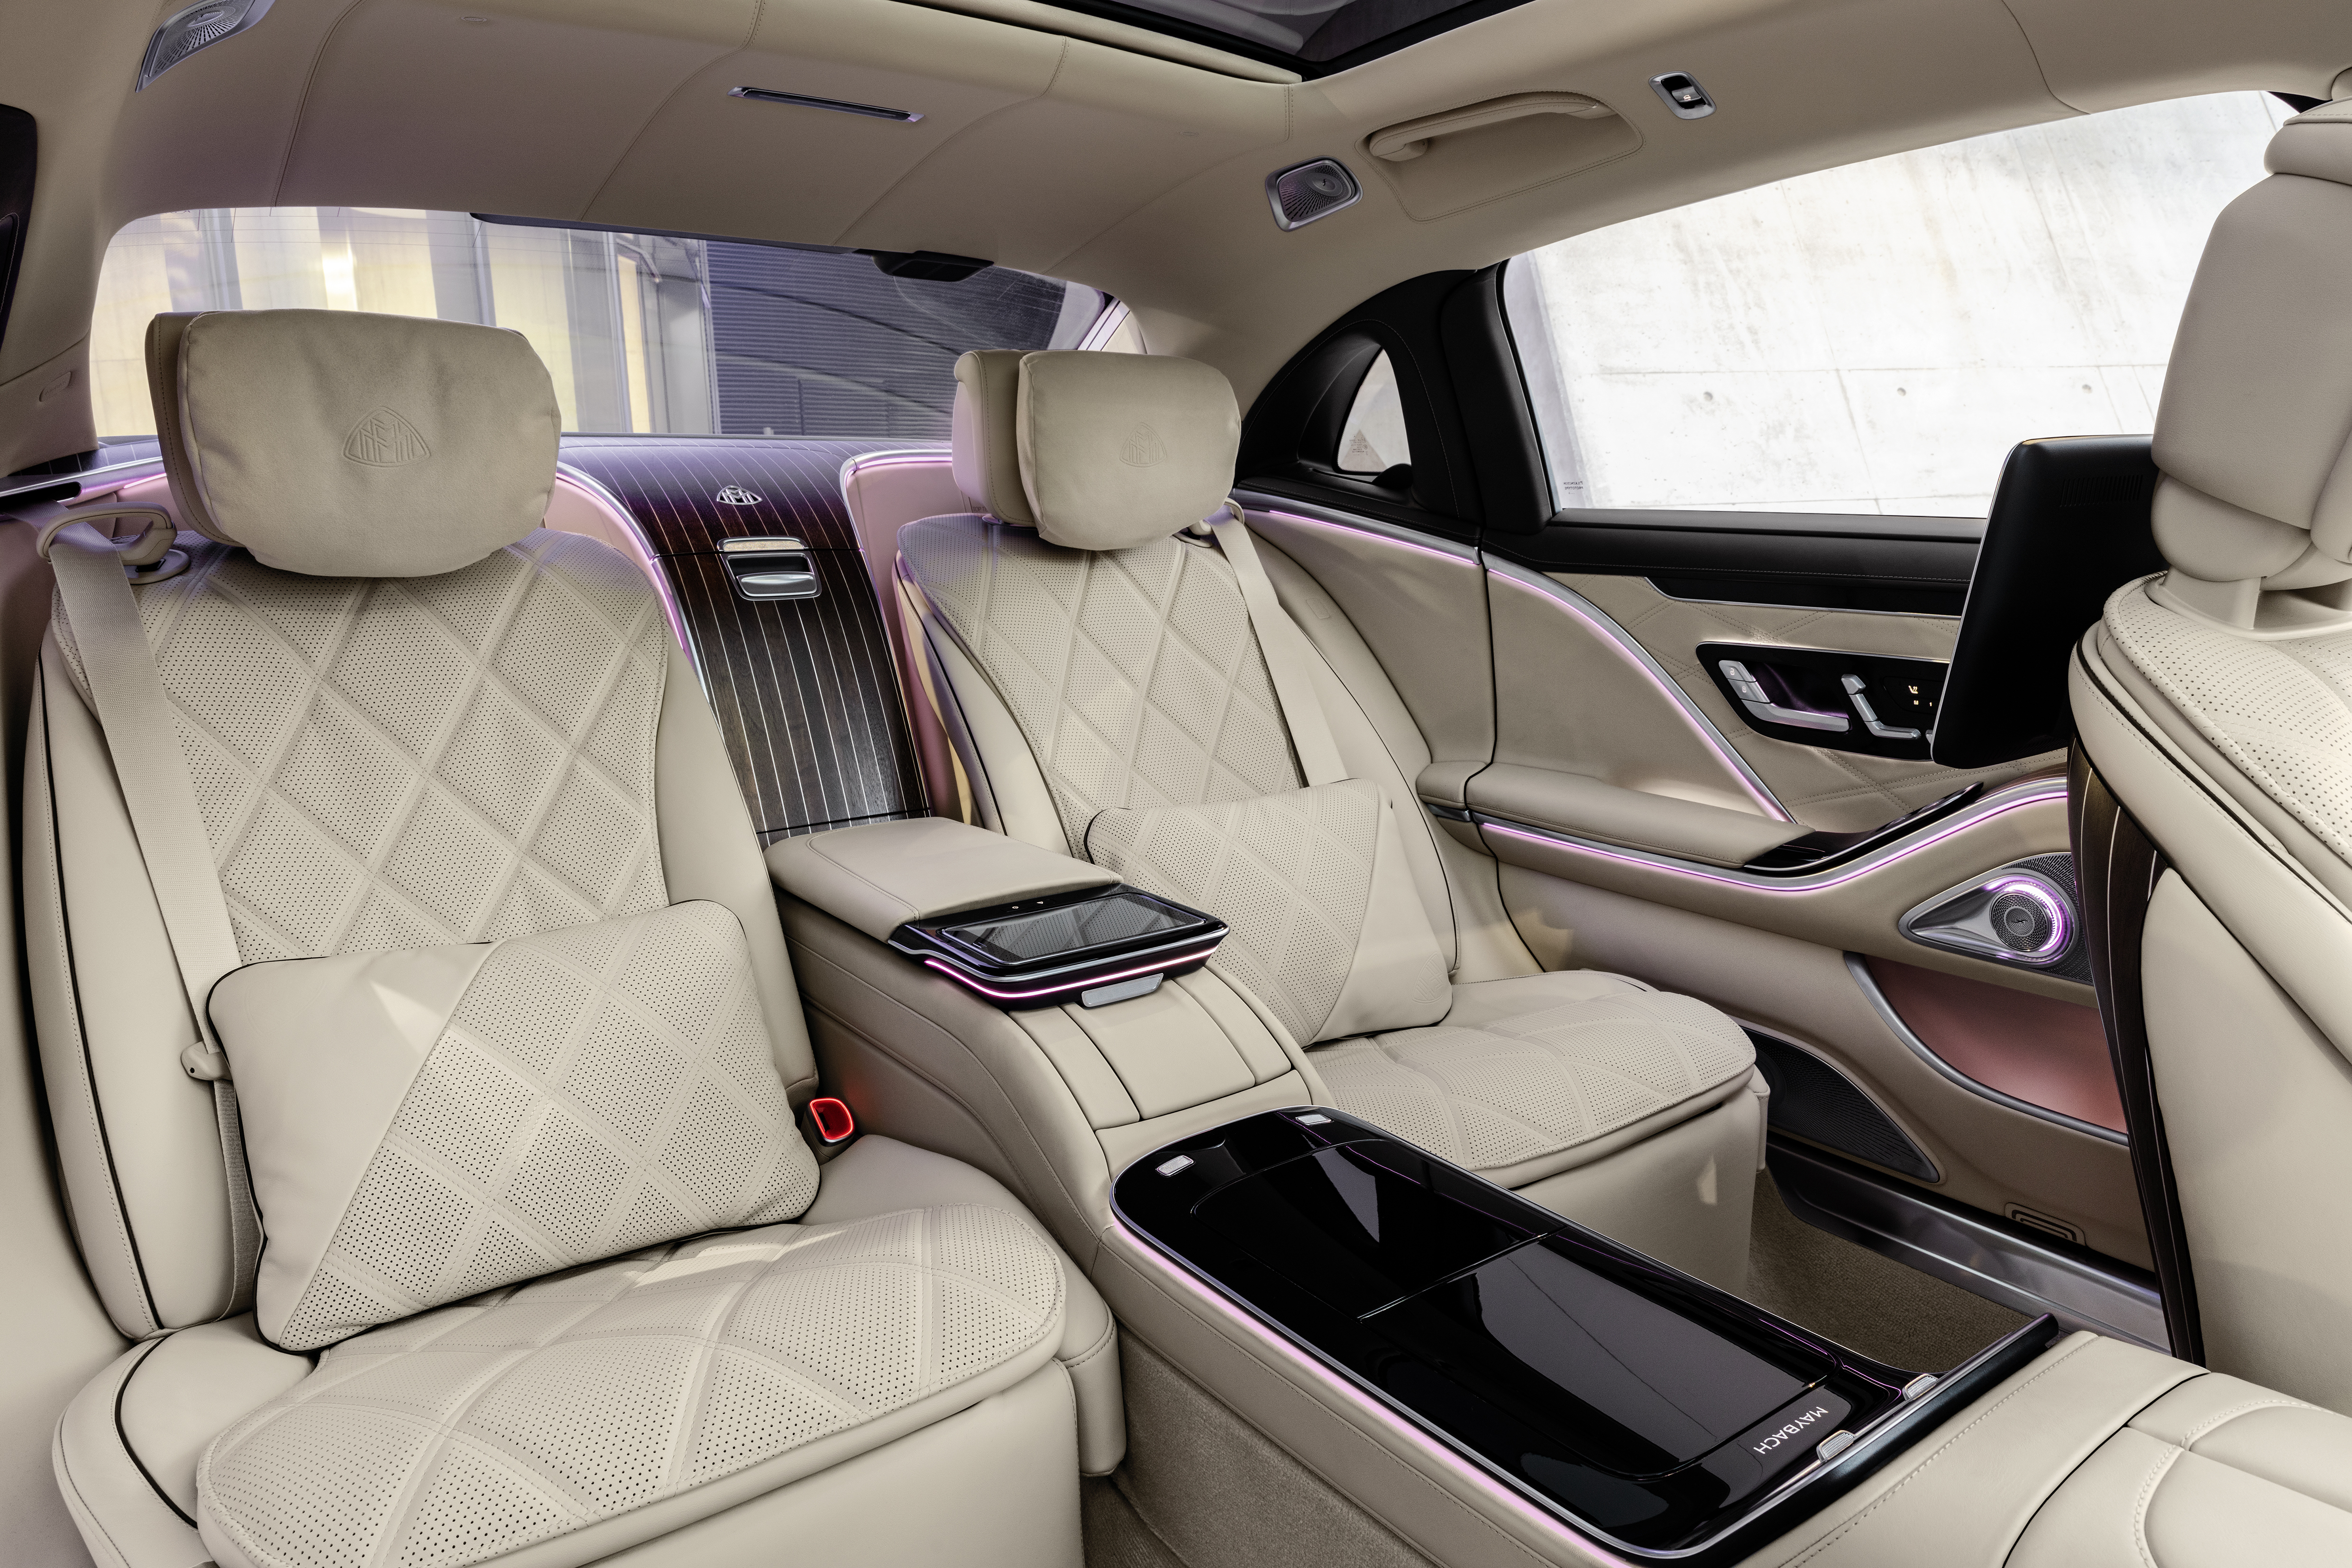 21 Mercedes Maybach S Class Unveiled Shows Why It Is The Definitive Luxury Limousine See Pics